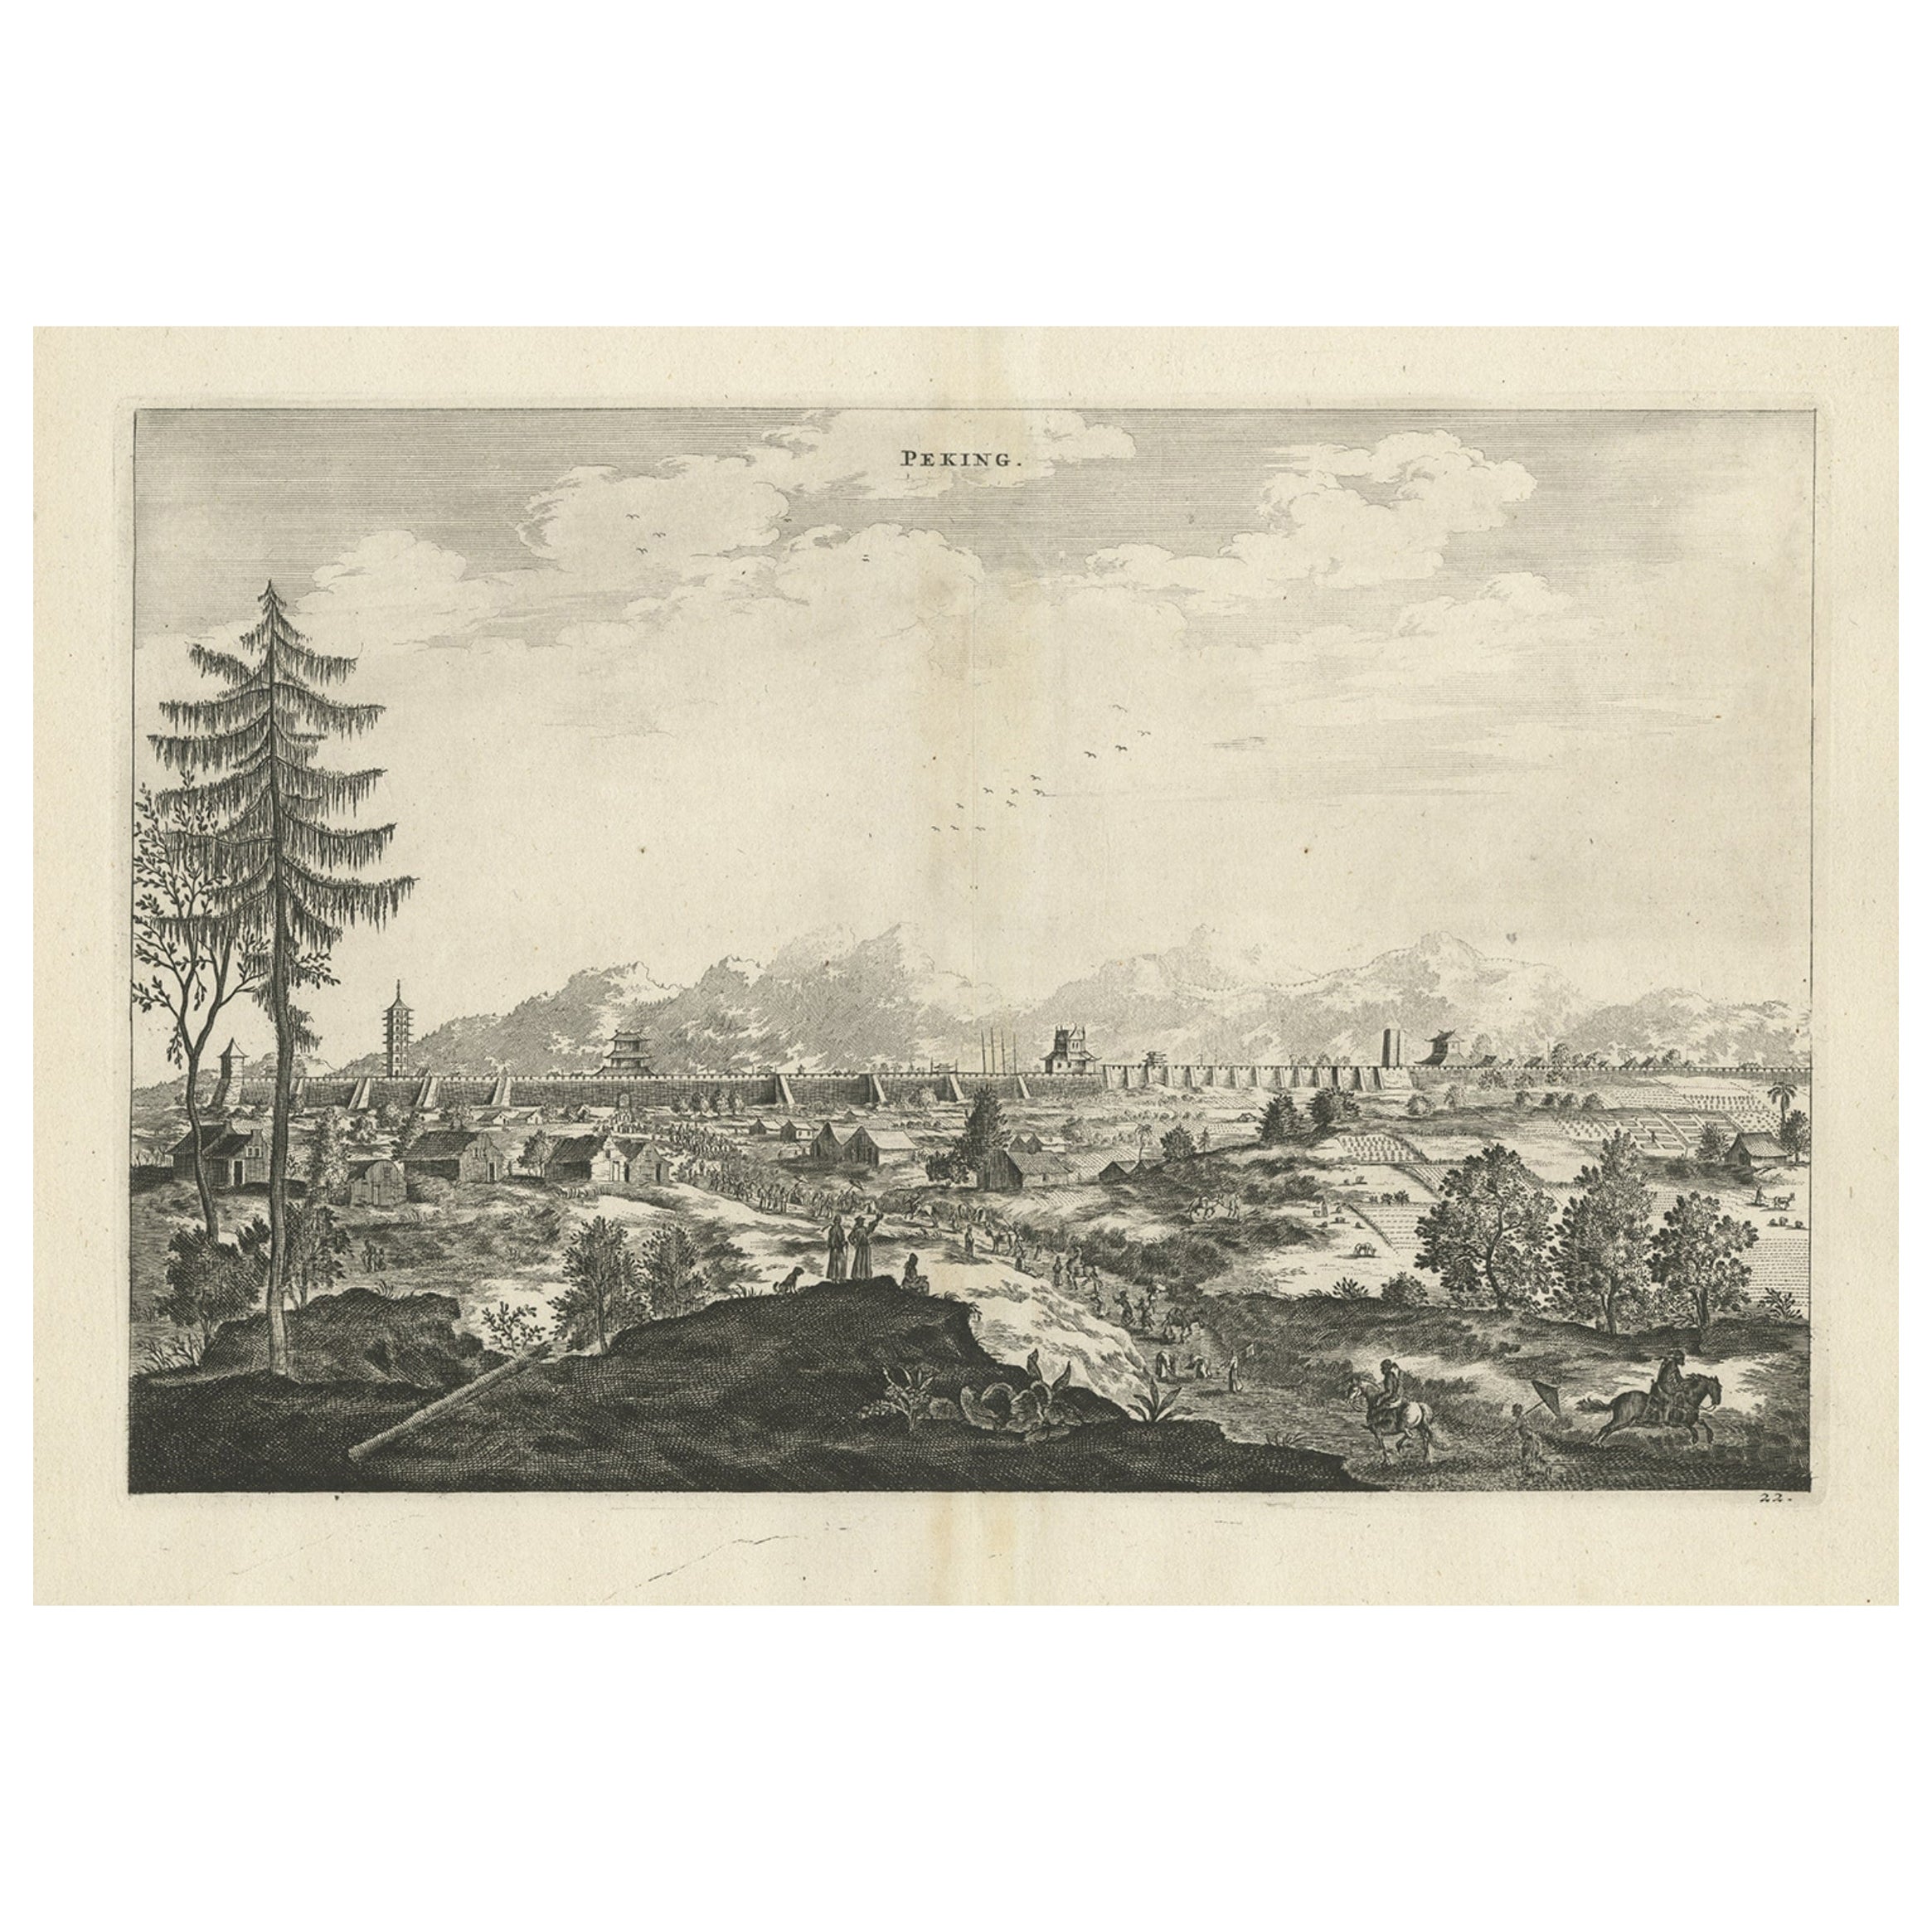 Original Copper Engraved Antique Print of the City of Bejing in China, 1668